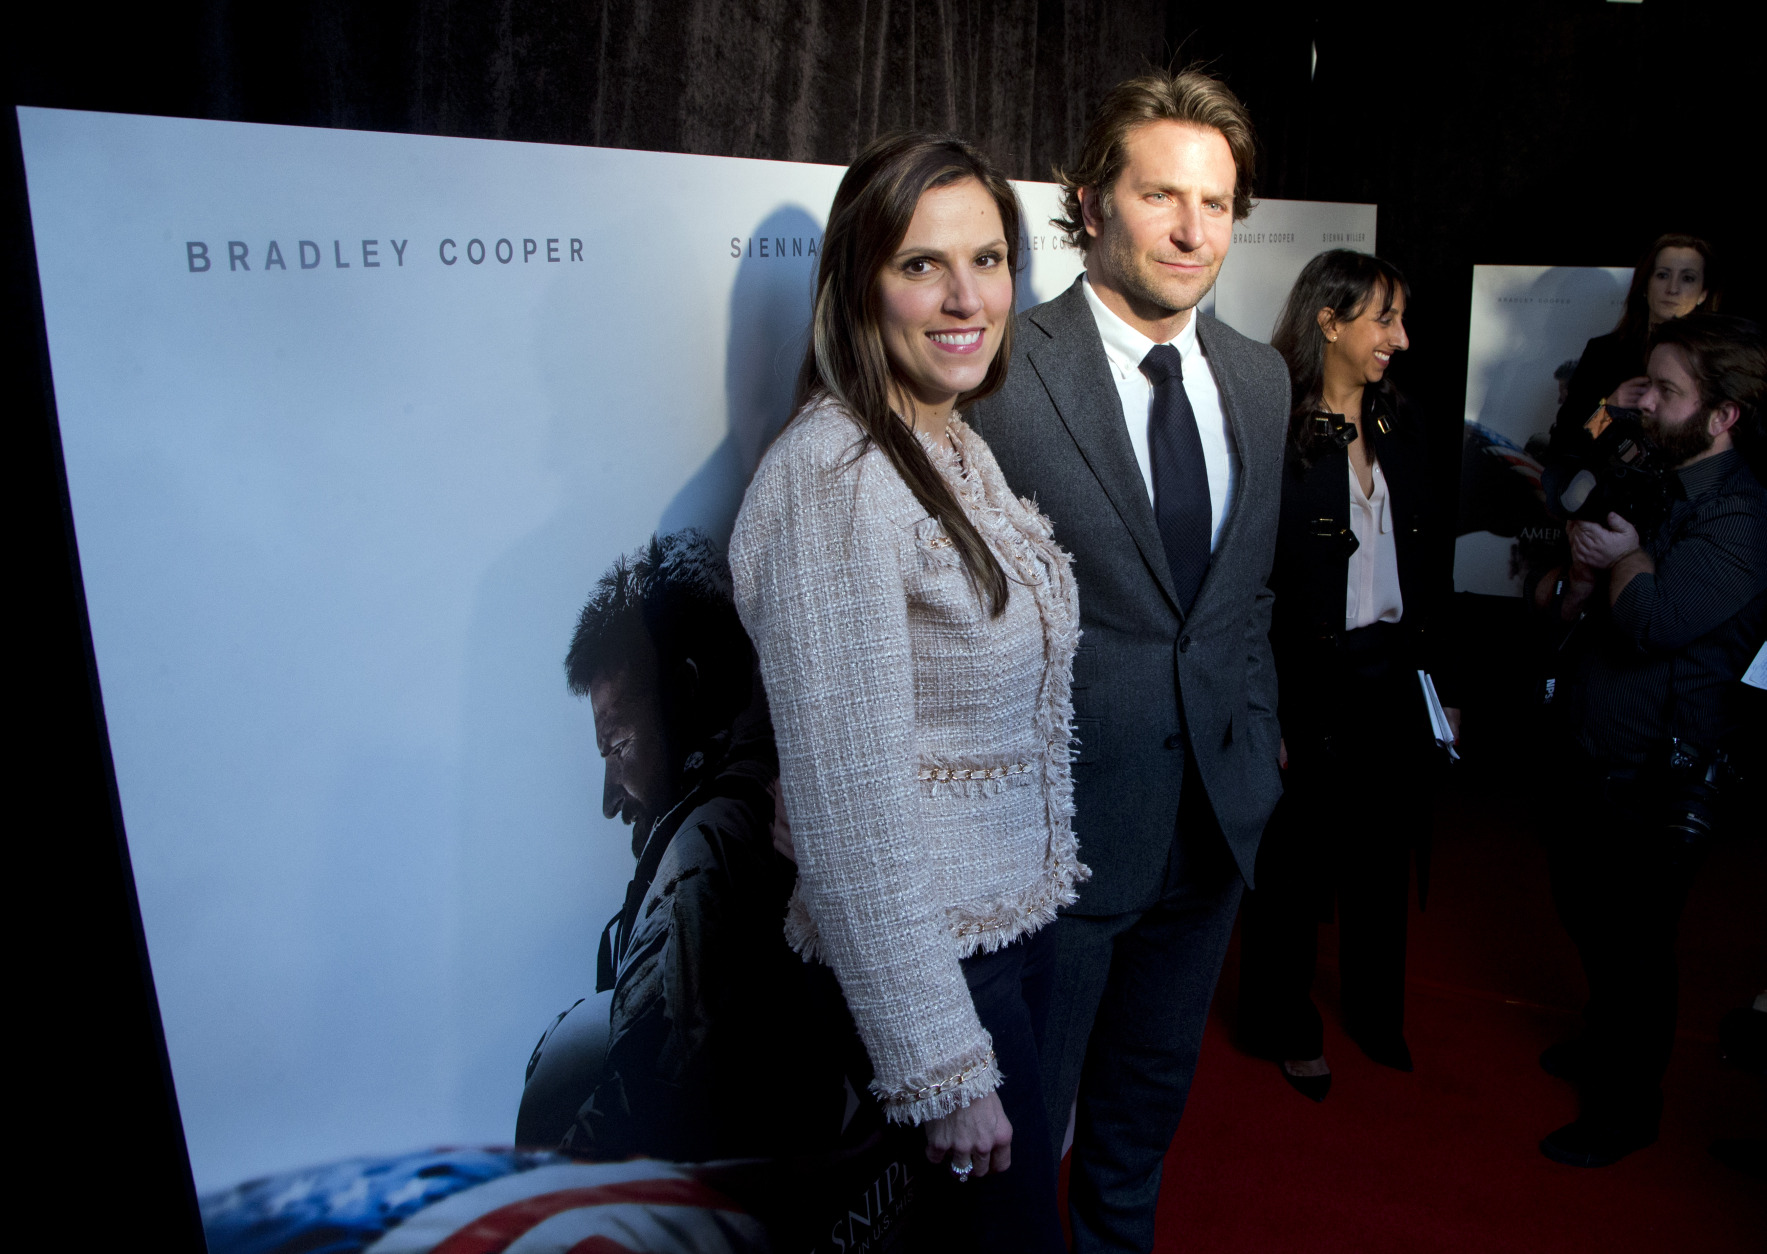 Actor Bradley Cooper and Taya Kyle, left, widow of US Navy SEAL Chris Kyle, arrive at the Washington premiere of the movie American Sniper at Burke Theatre at the U.S. Navy Memorial in Washington, Tuesday, Jan. 13, 2015. Cooper played Chris Kyle, the deadliest sniper in American military history and author of the book American Sniper," made into a movie with the same title.  (AP Photo/Manuel Balce Ceneta)